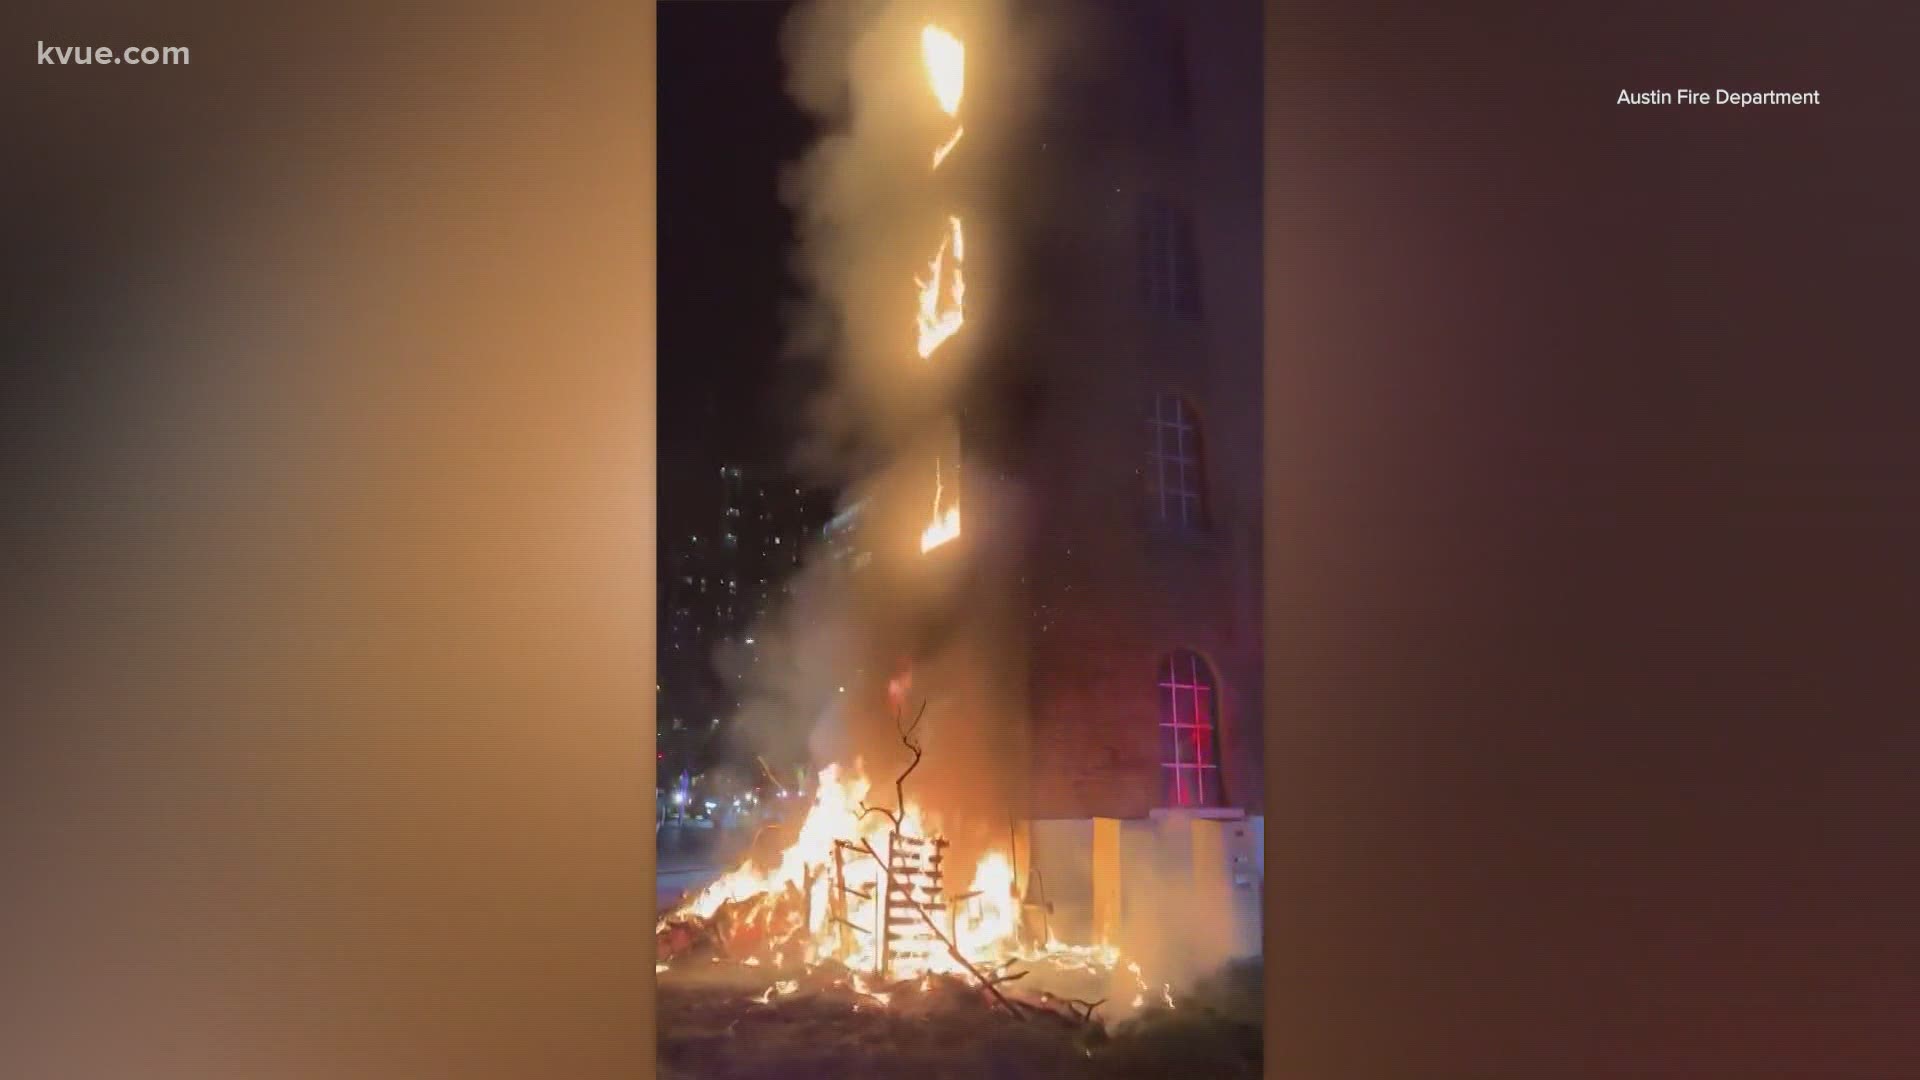 Arson is being investigated after Thursday's Buford Tower fire. City and State leaders are sparing over camping rules after the incident.